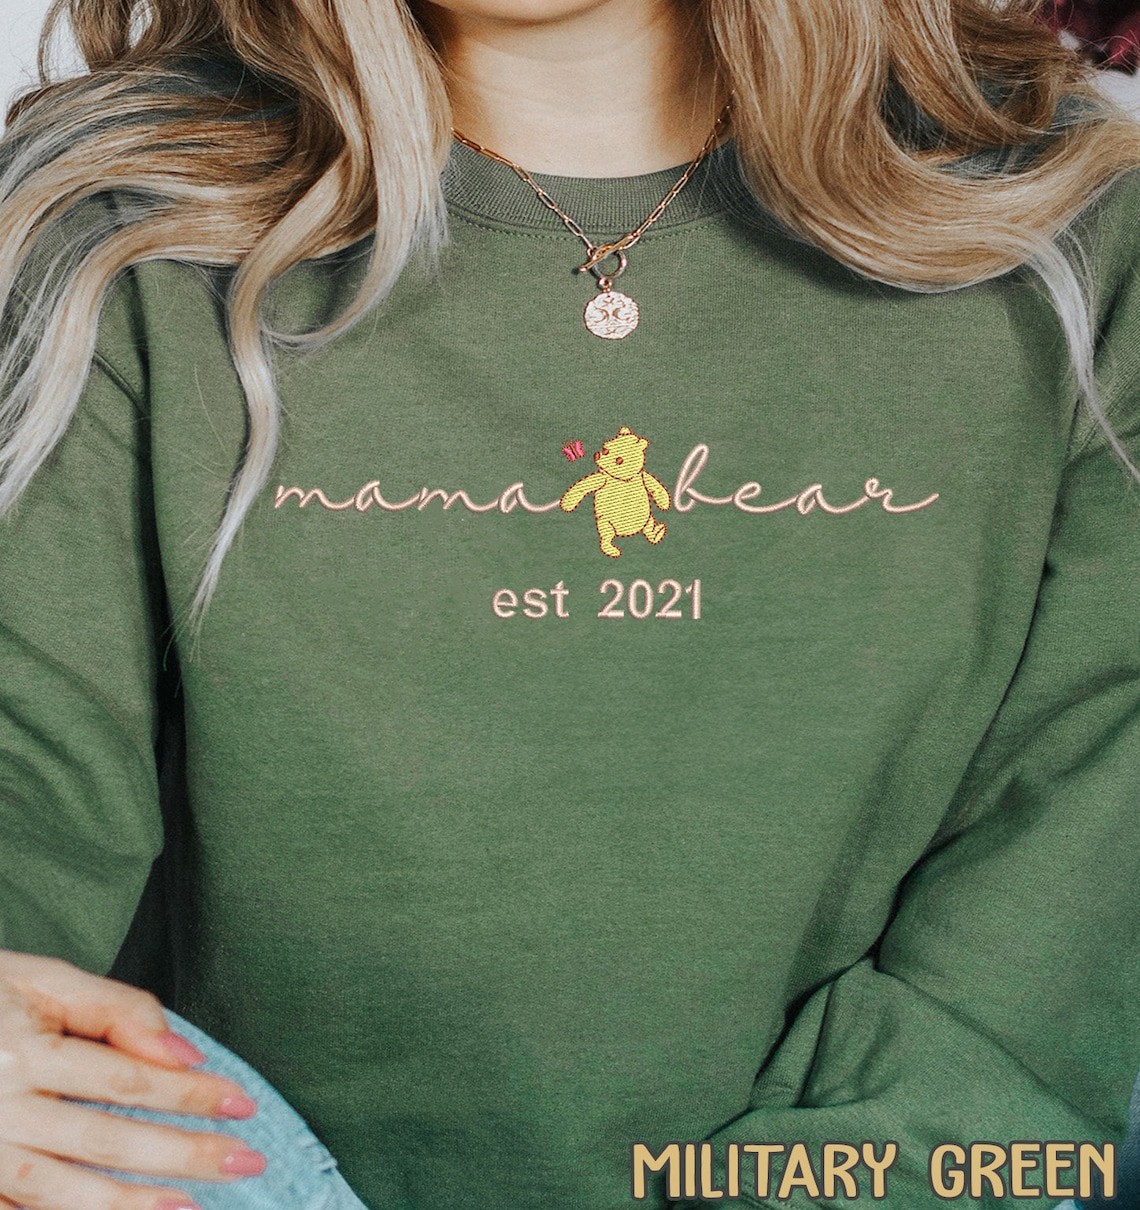 Custom Embroidered Mama Bear Sweatshirt With Kids Name For Mother's Day Gift Ideas